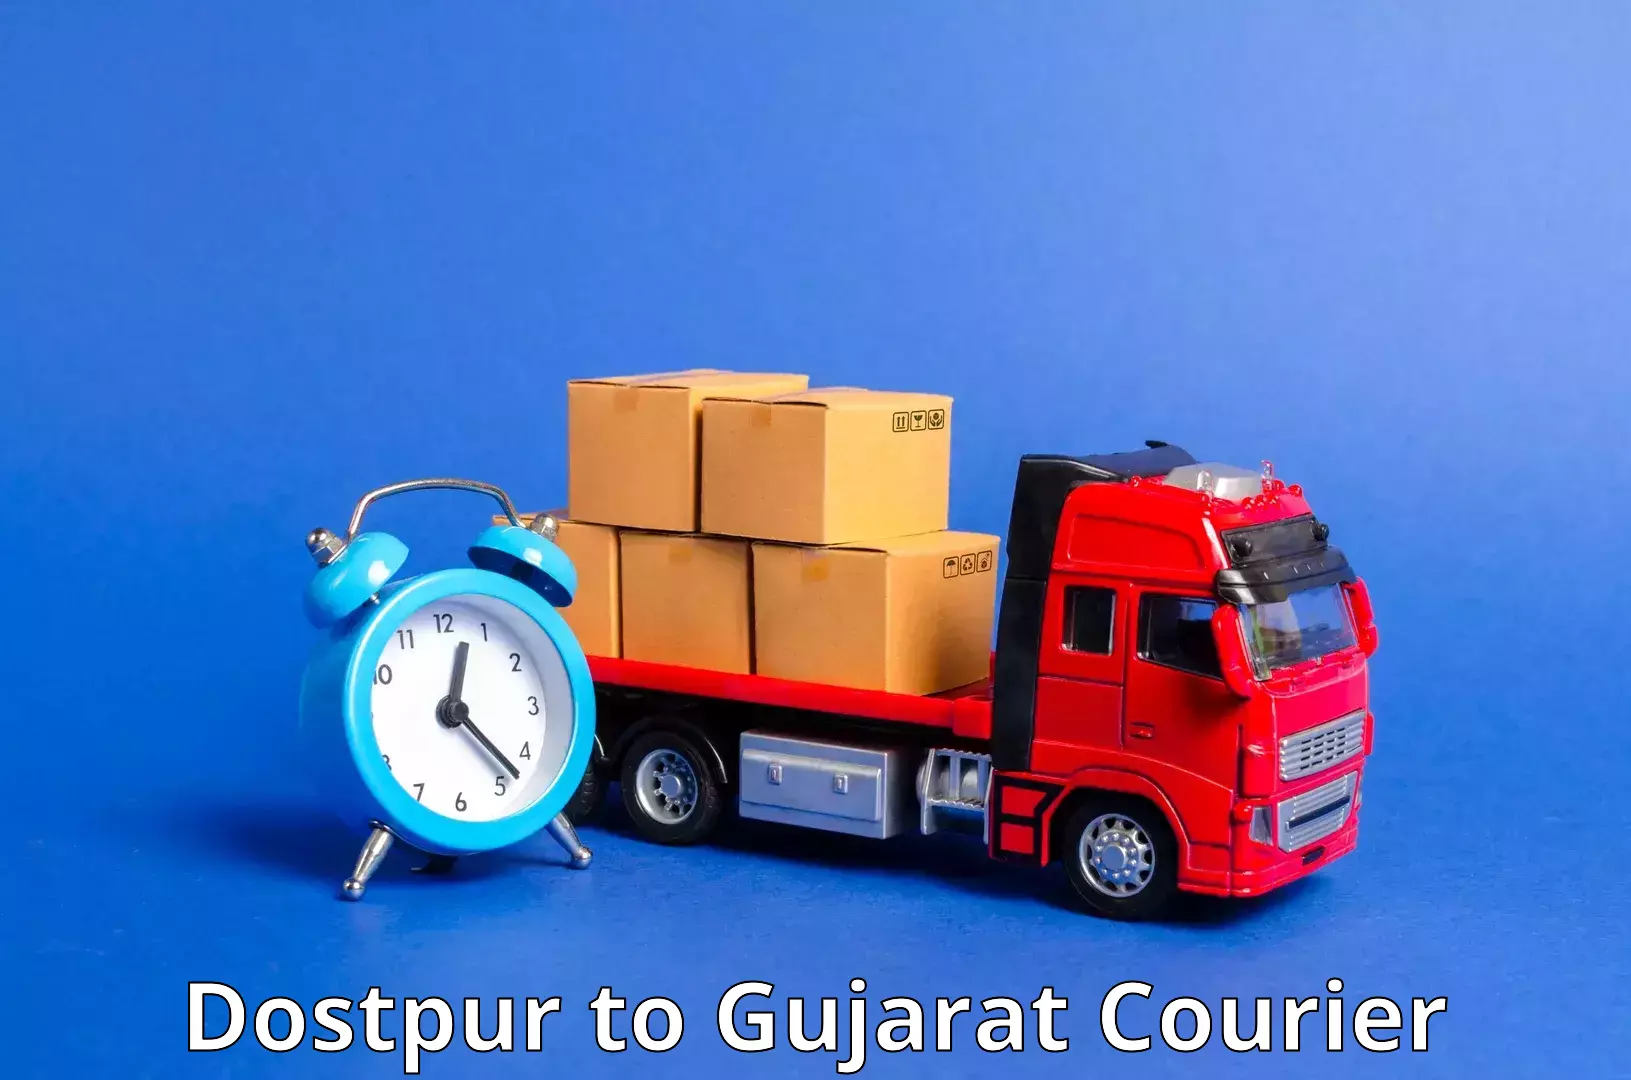 Urban courier service Dostpur to Tapi